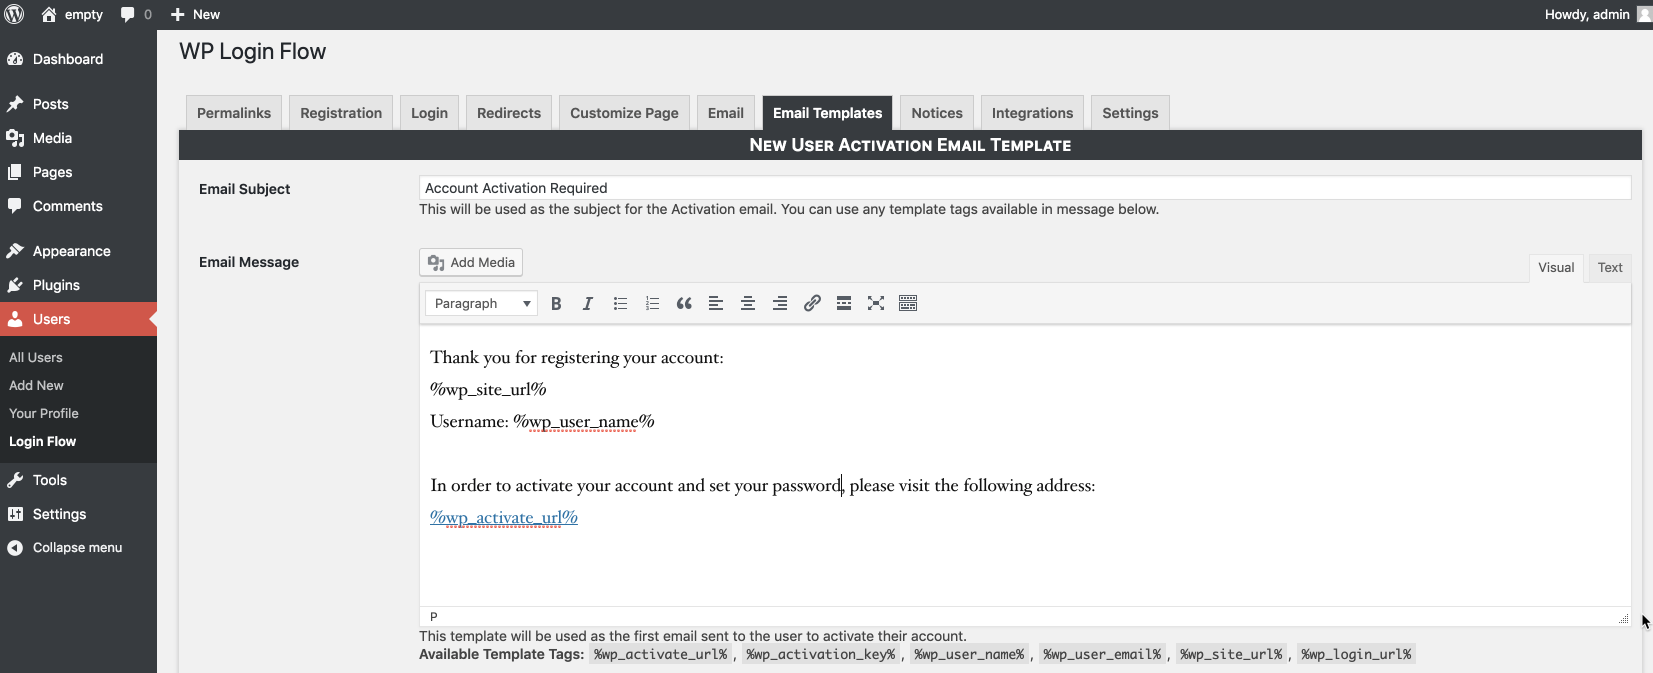 New User Email Template Customization